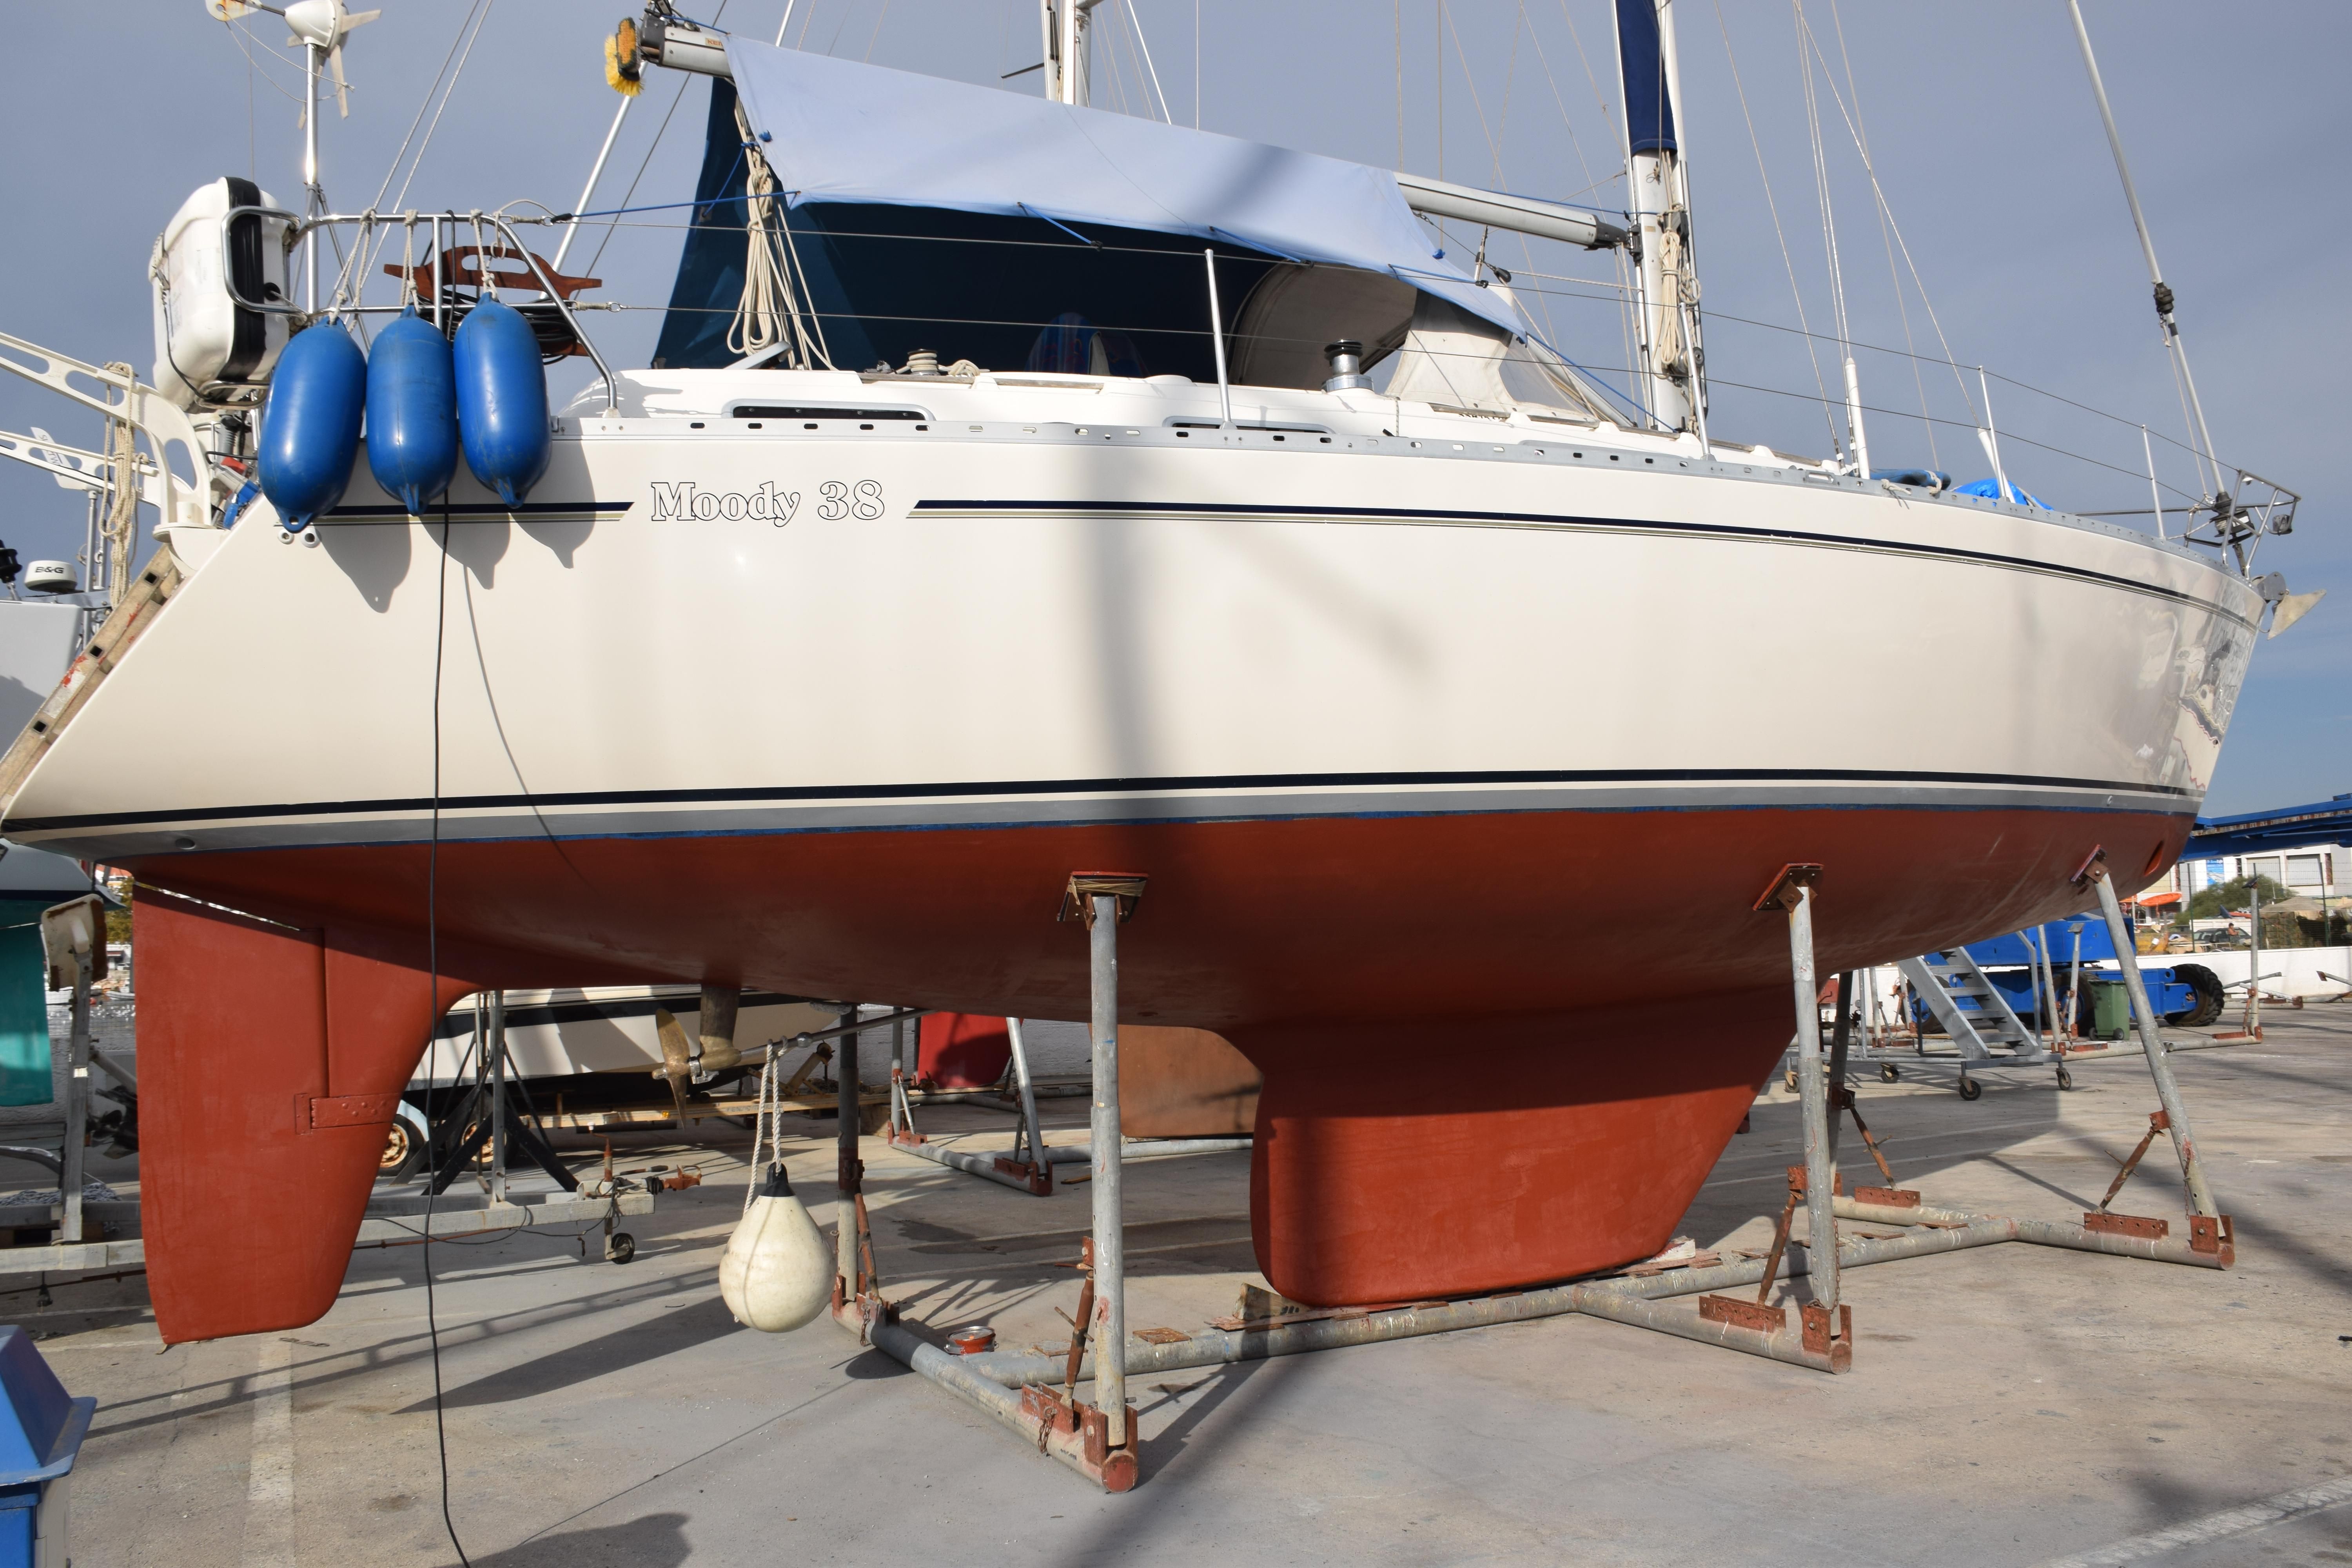 38 foot sailing yachts for sale